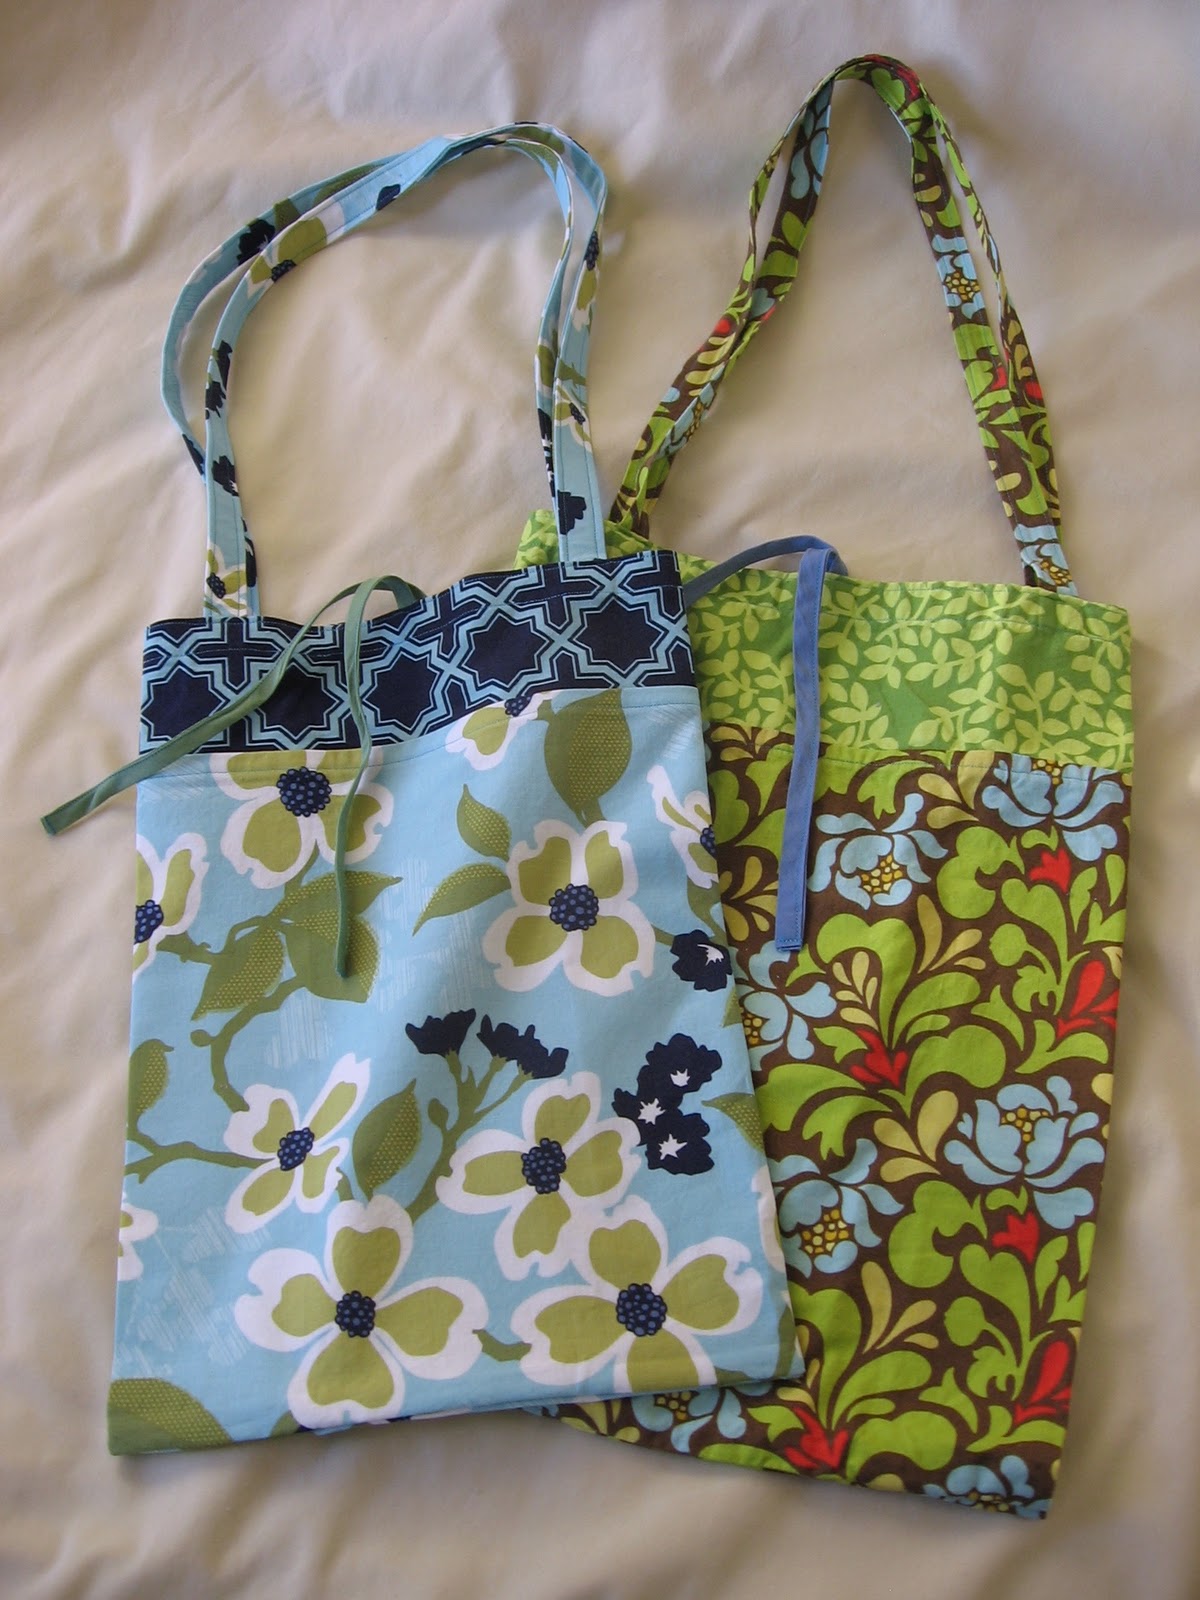 12 Free Upcycled Bag Patterns  Upcycled bag, Bag pattern, Bags